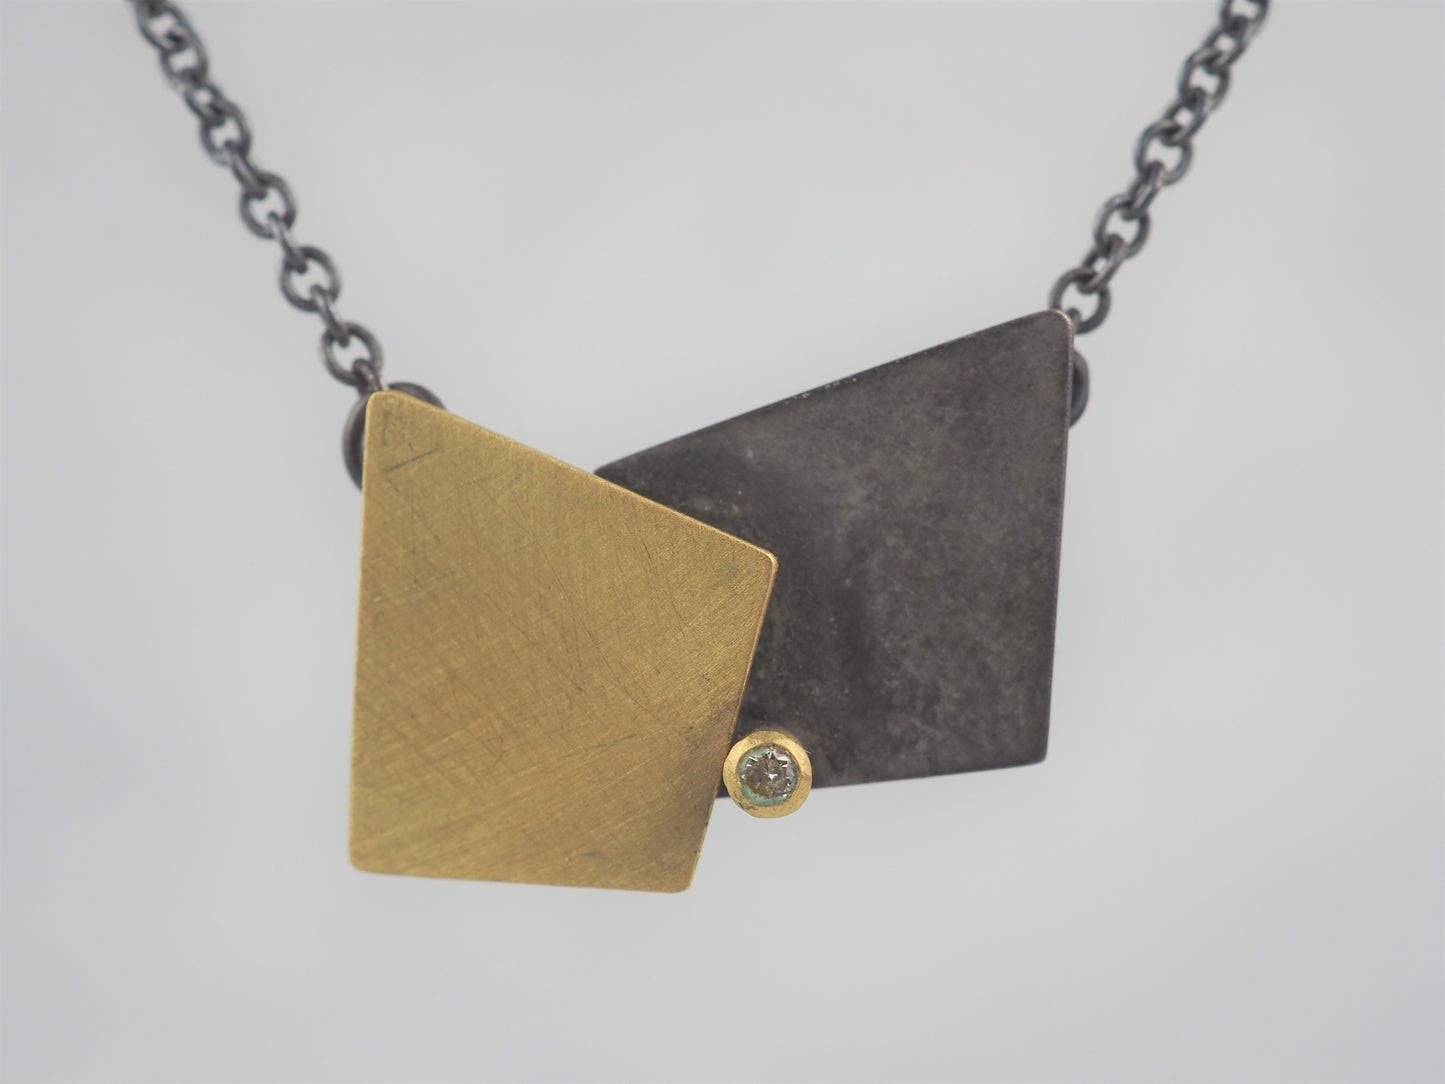 Krinos, Daphne – Gold, Oxidised Silver and Diamond Necklace